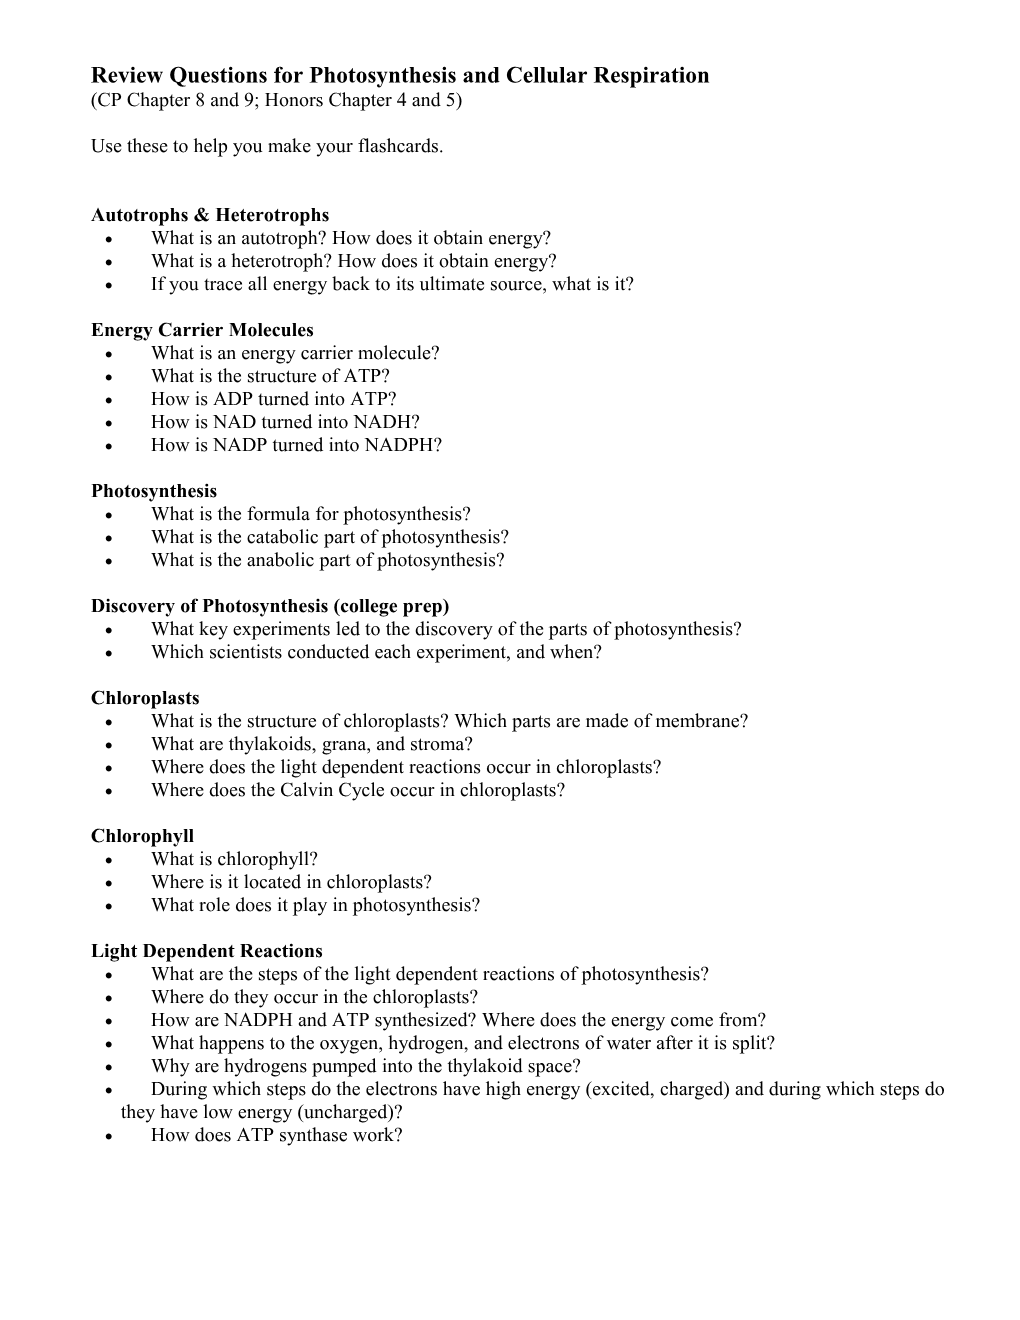 Review Questions for Photosynthesis and Cellular Respiration